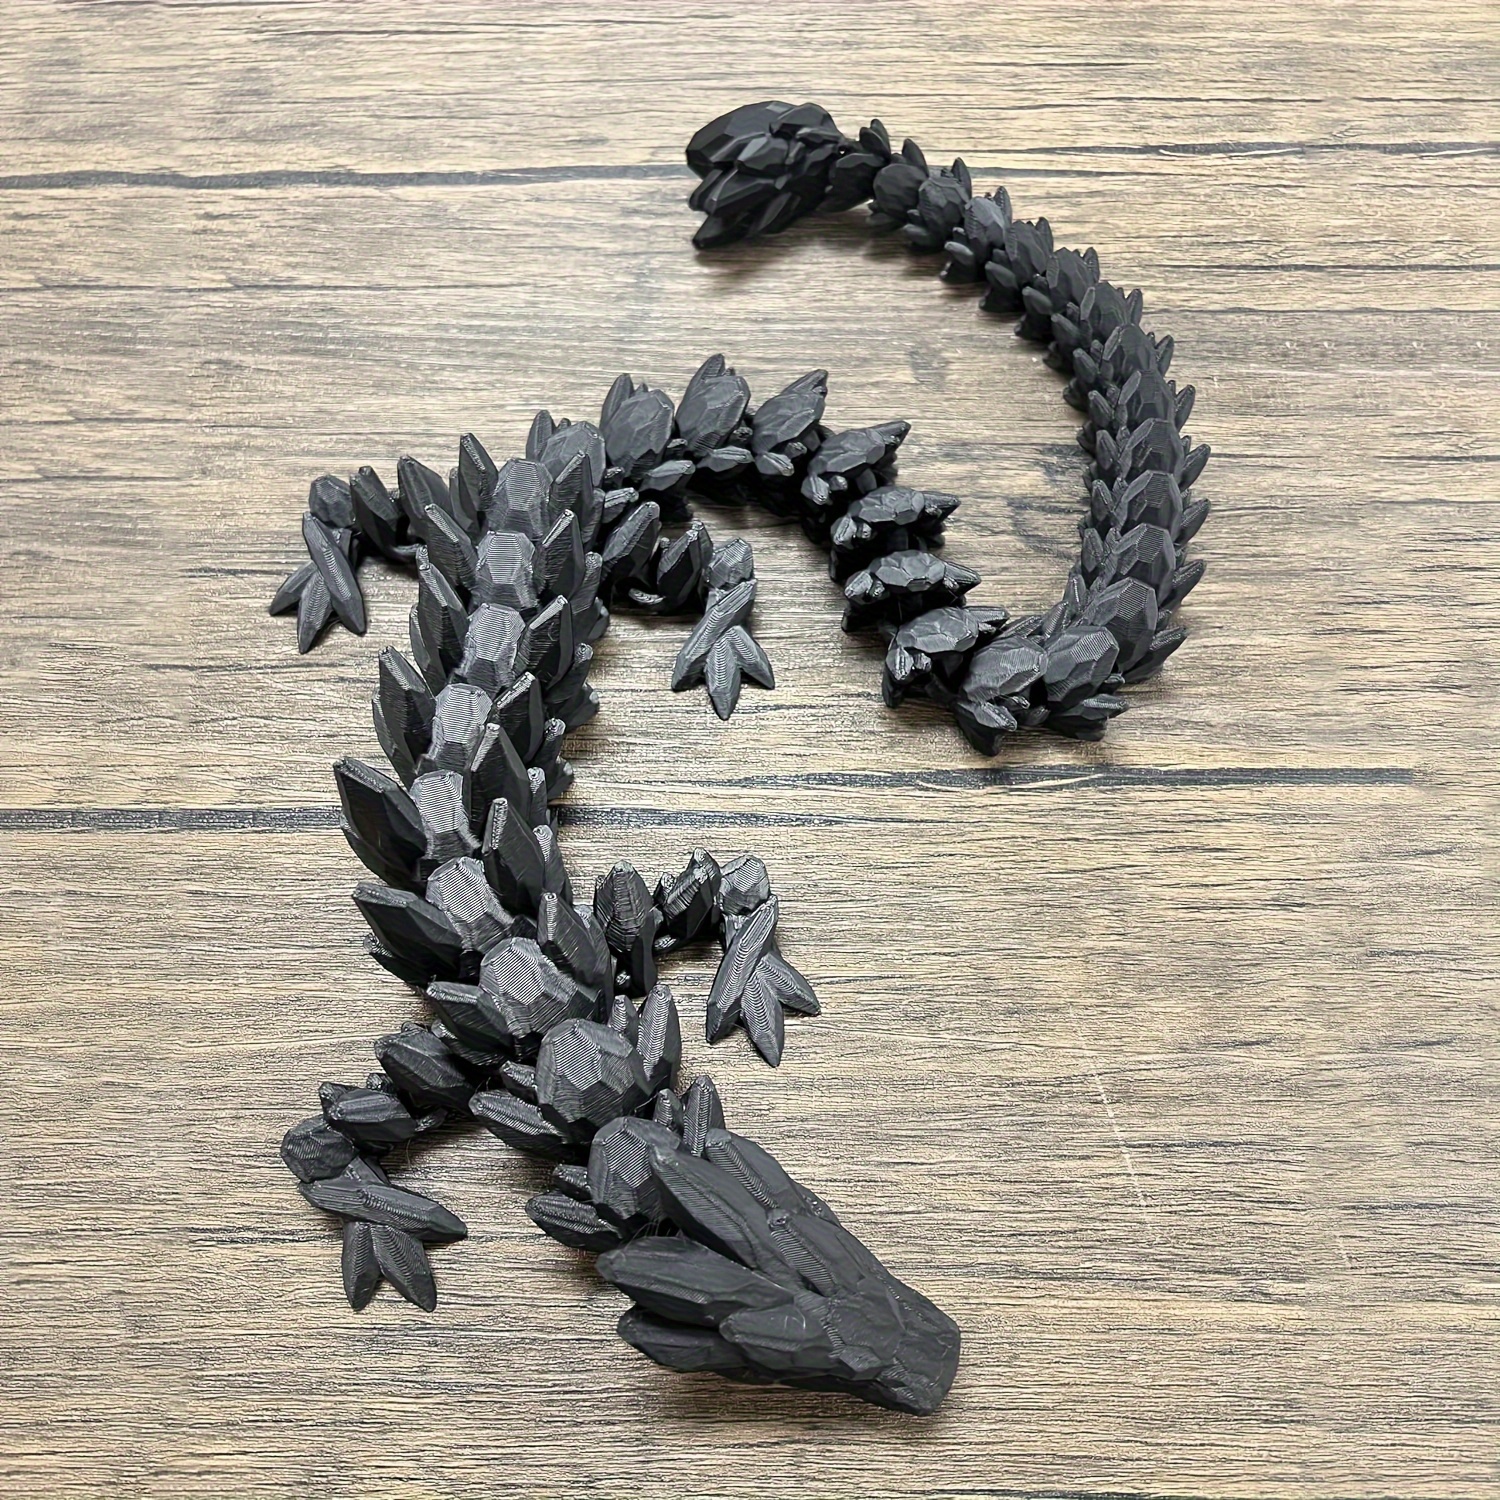 Flexi Dragon 3D Printed Articulated Fidget Toy Various Colors